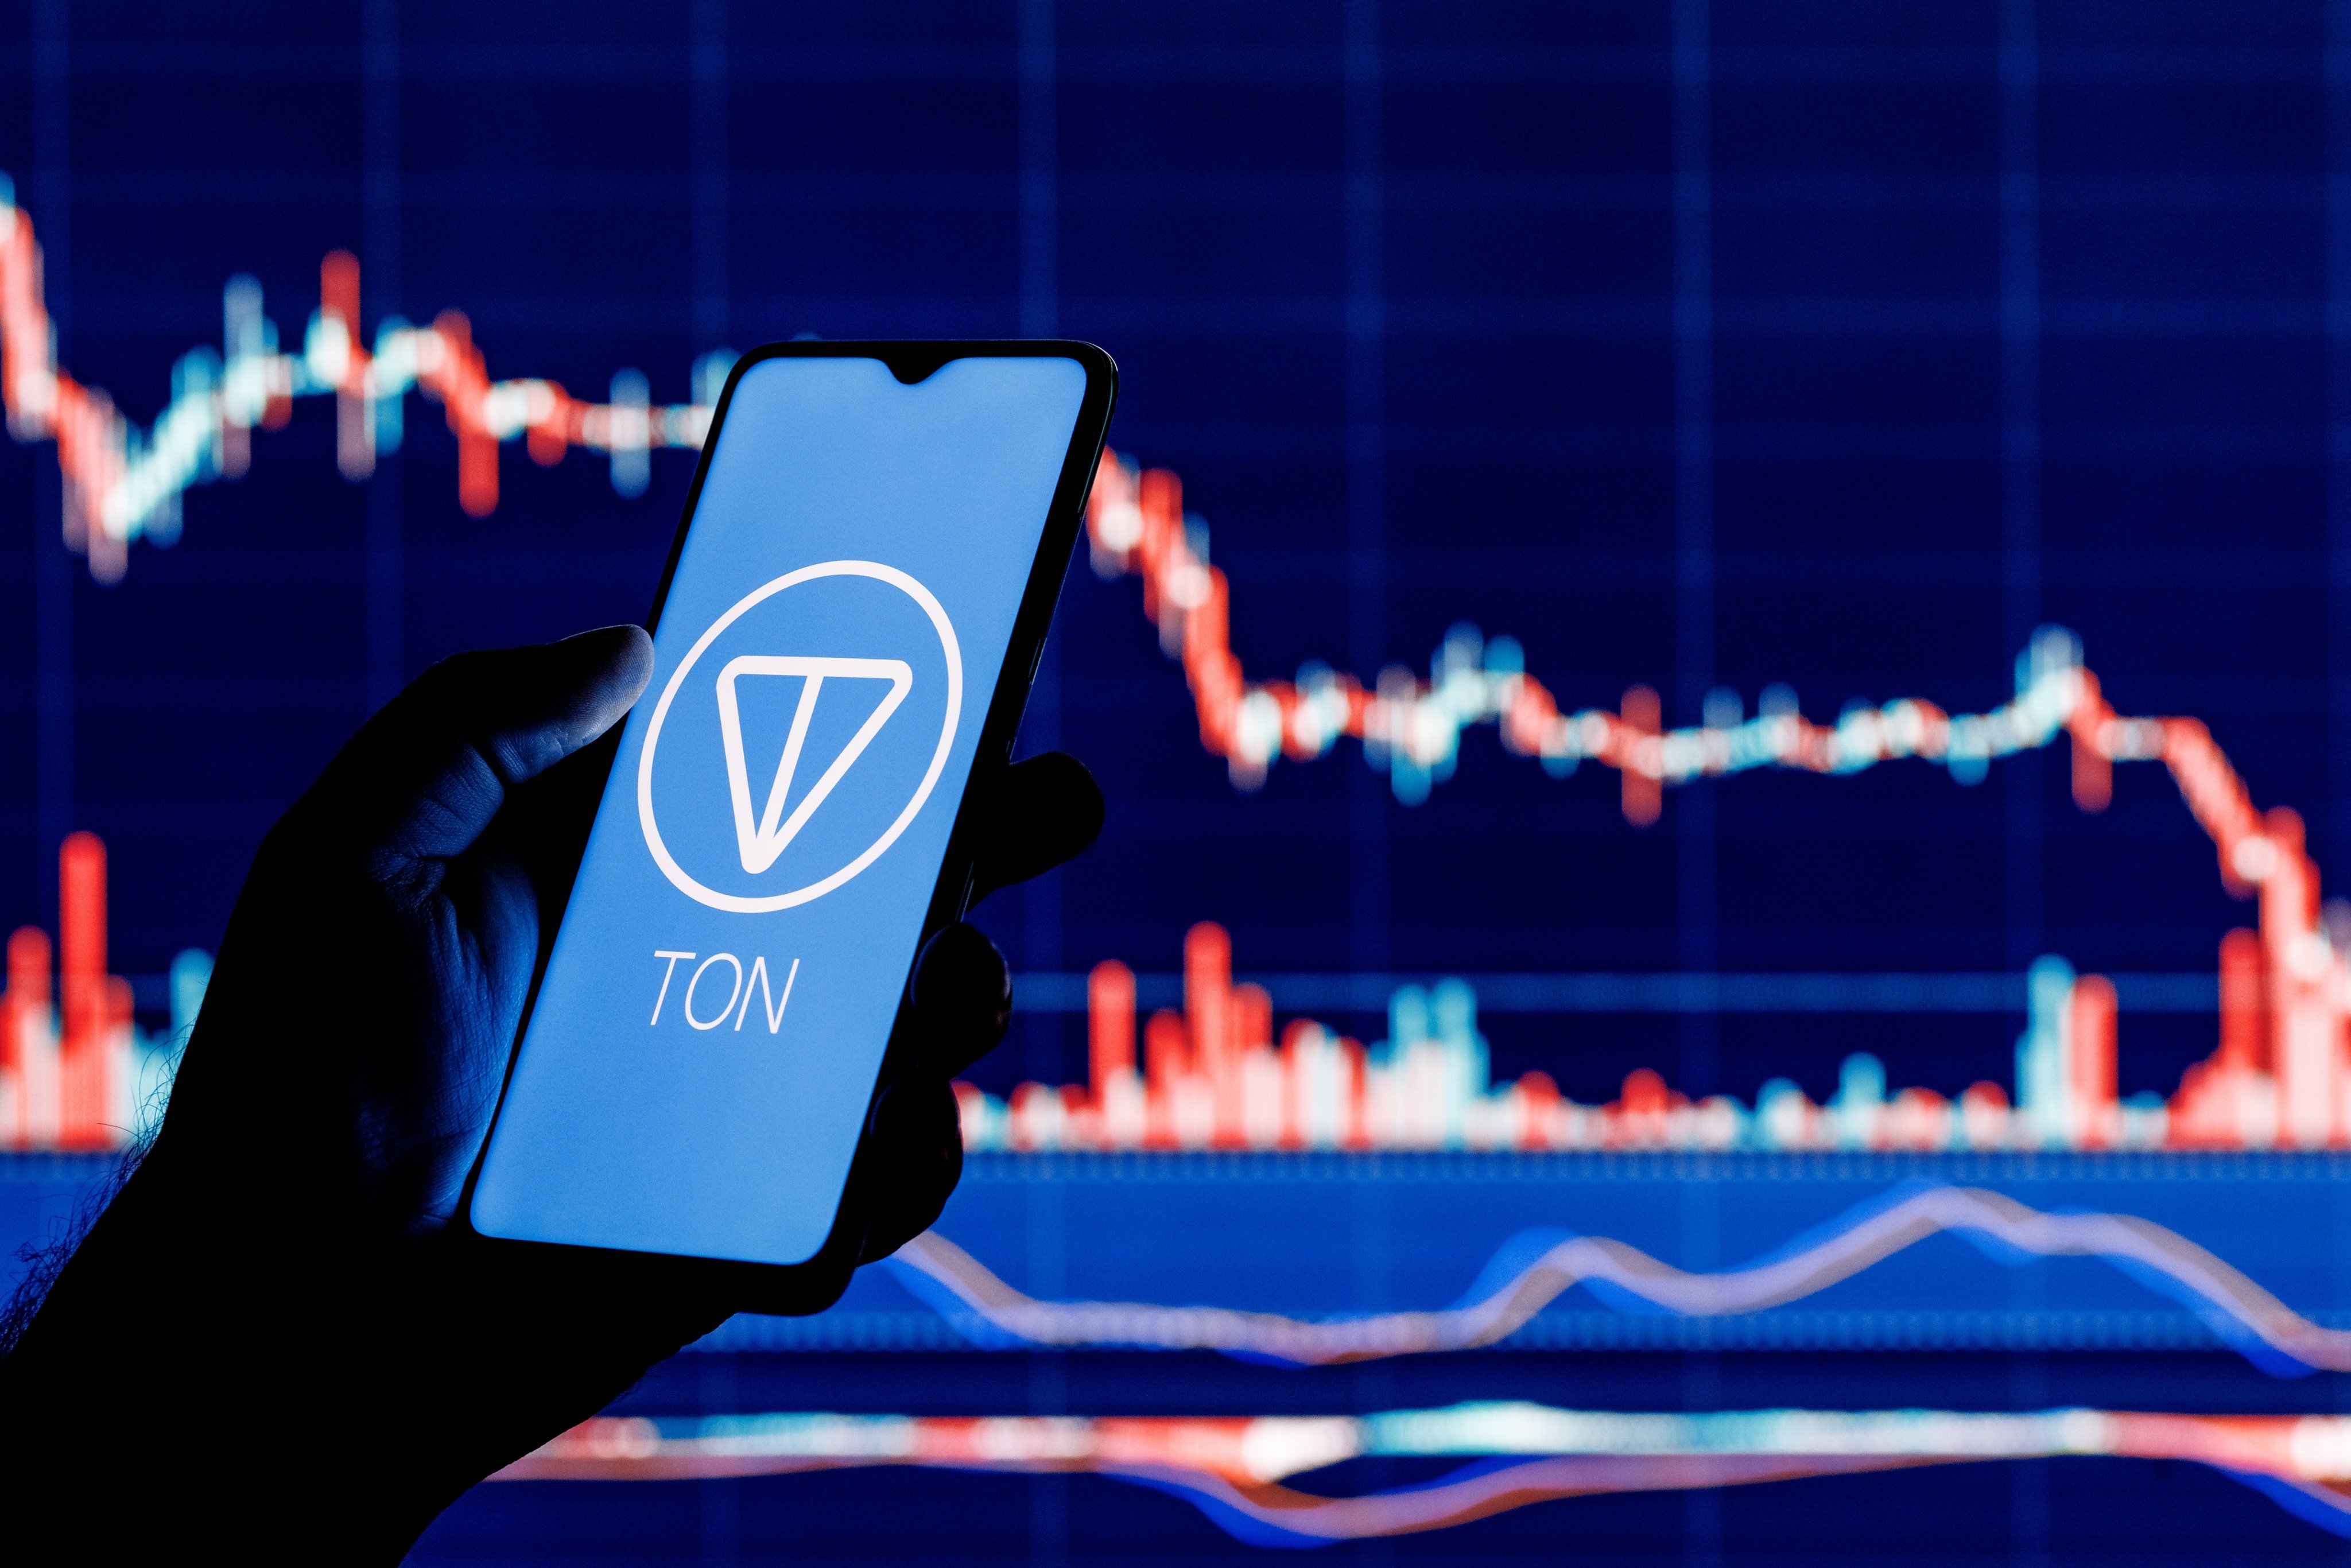 The TON blockchain was started by Telegram but later abandoned after regulatory challenges before a separate group took up its development. It is now pushing adoption through Telegram mini apps. Photo: Shutterstock